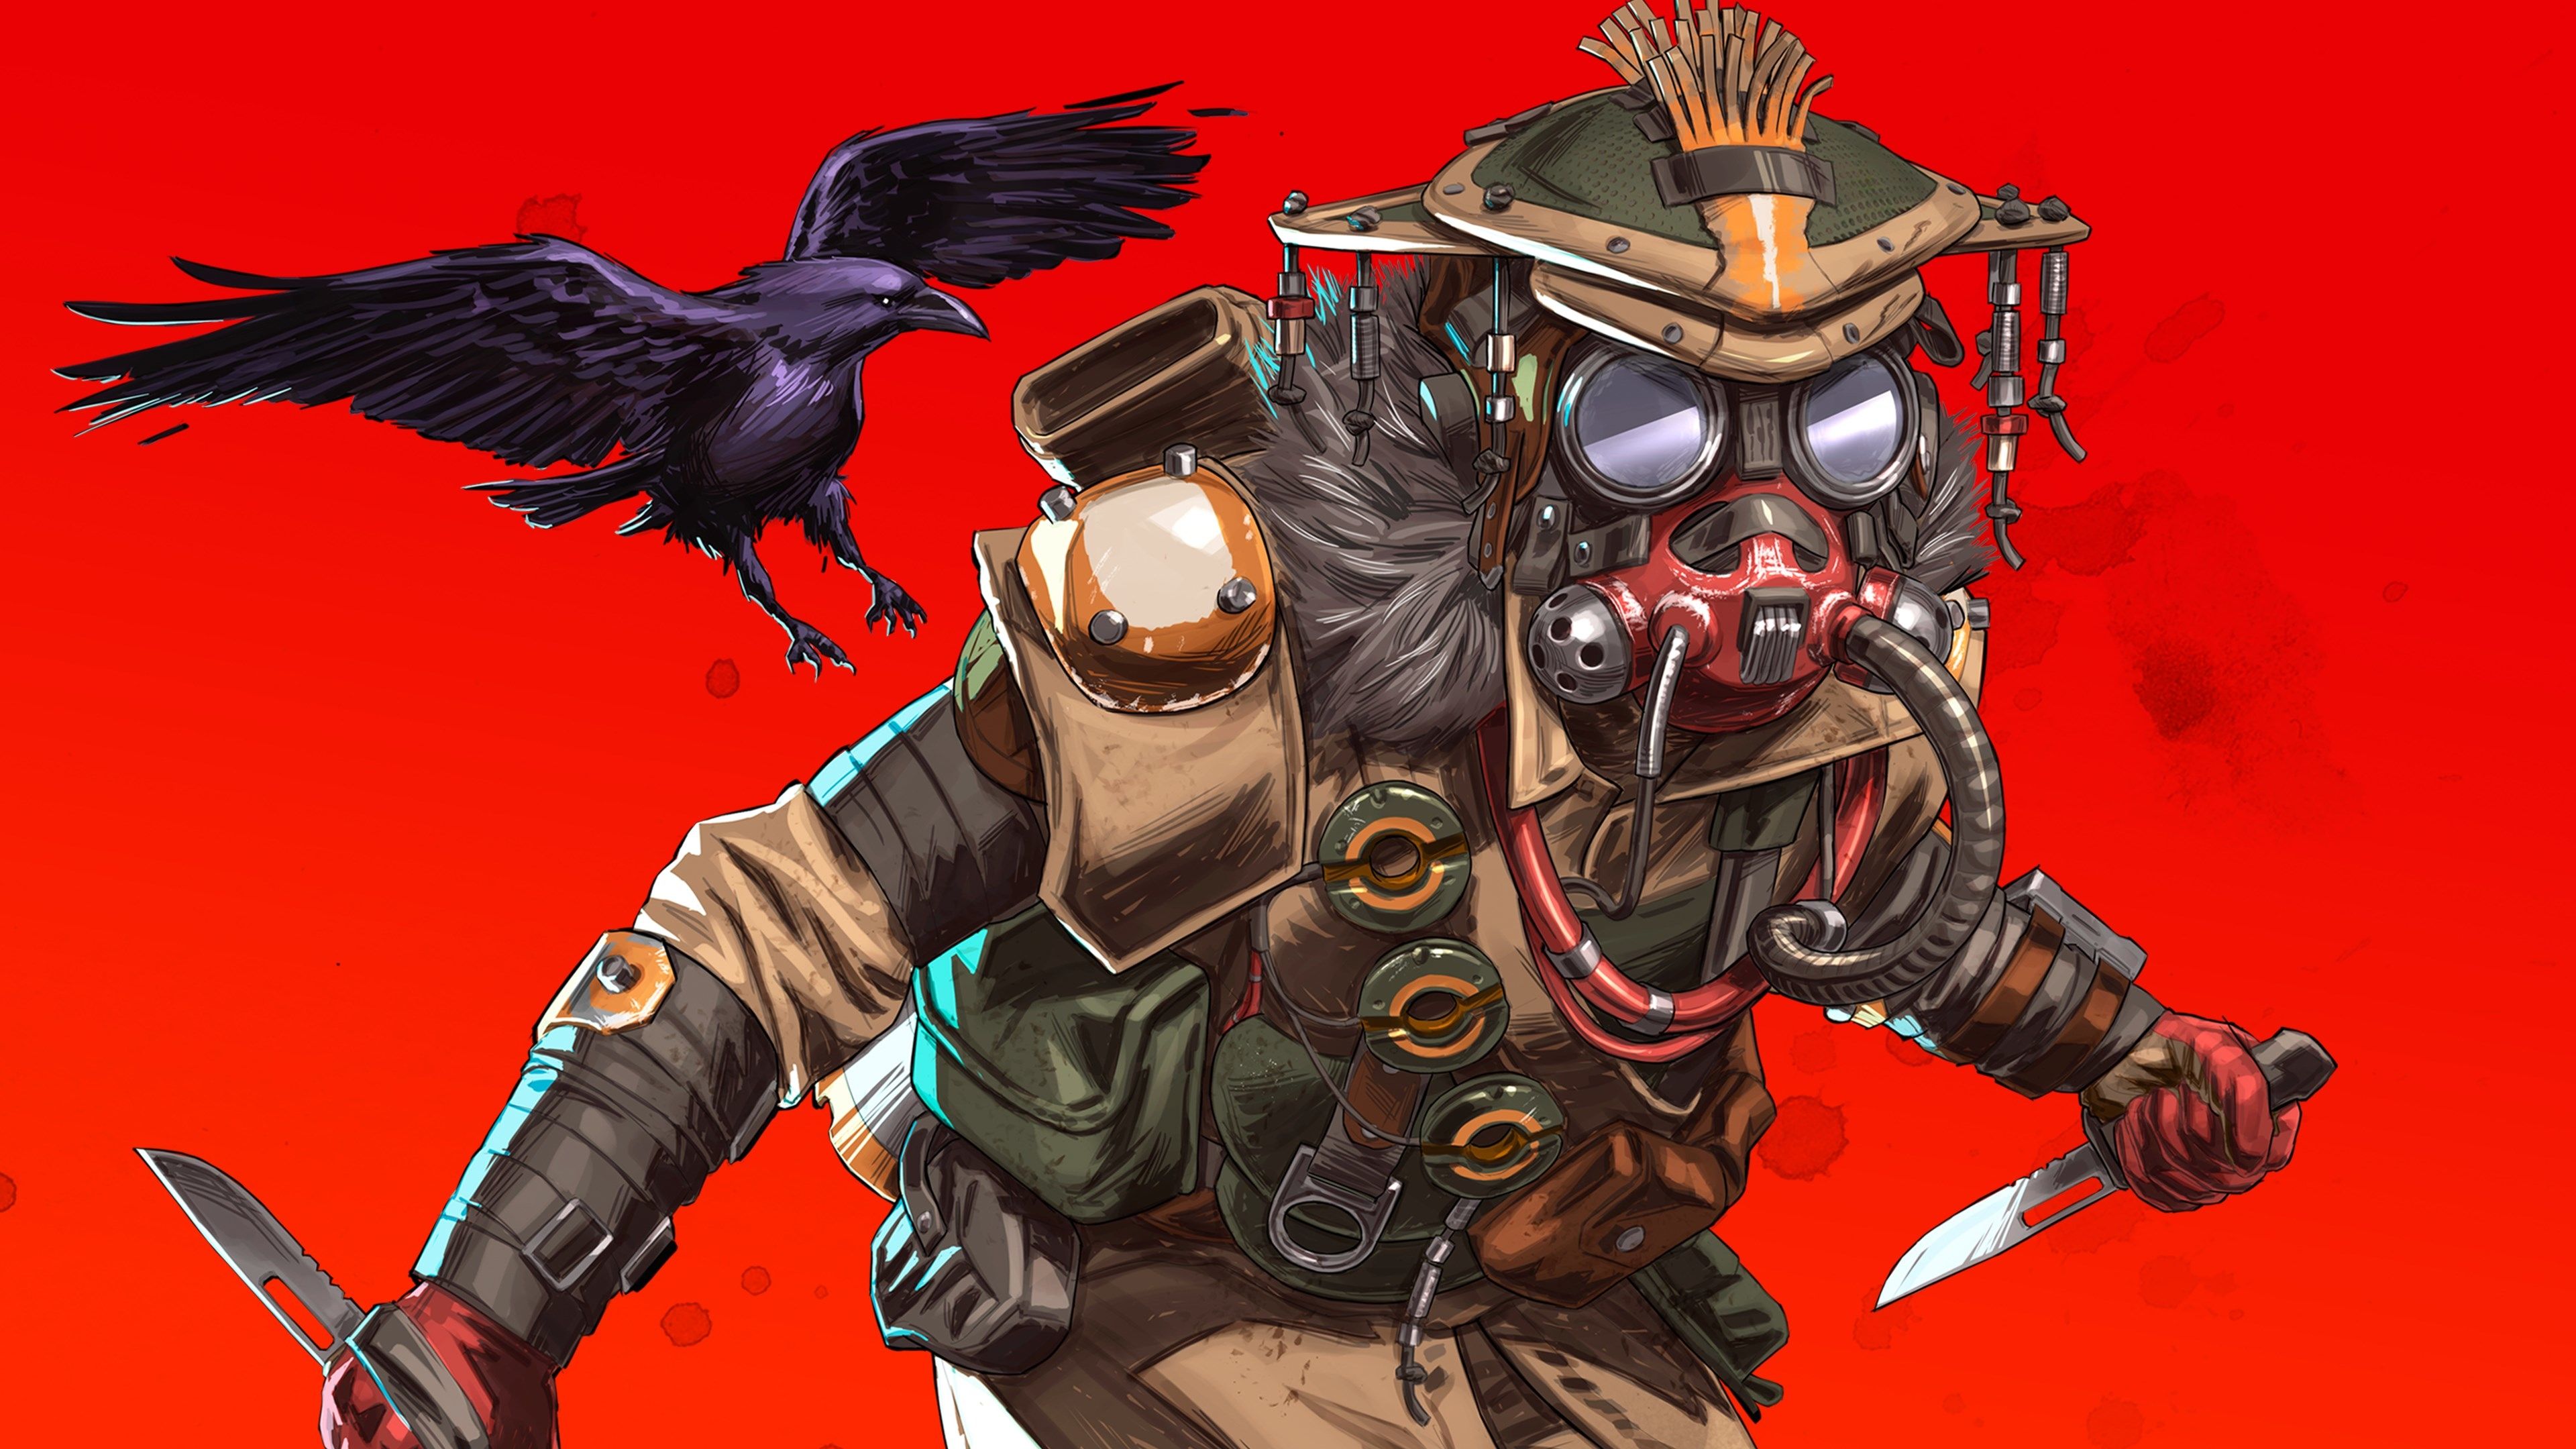 Apex Legends Bloodhound 2560x1024 Resolution Wallpaper, HD Games 4K Wallpaper, Image, Photo and Background